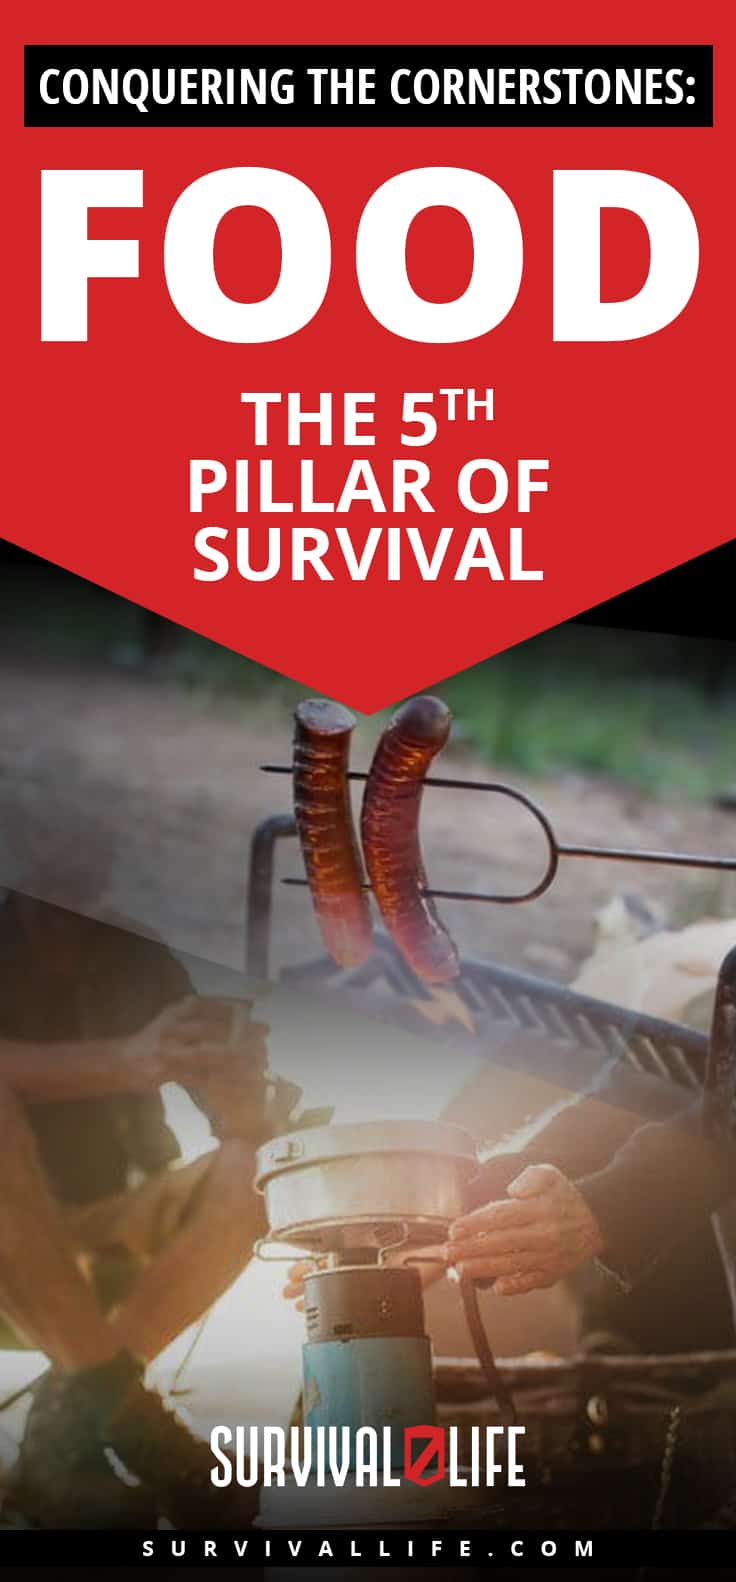 Check out Conquering the Cornerstones: Food - the 5th Pillar of Survival at https://survivallife.com/food-pillar-survival/